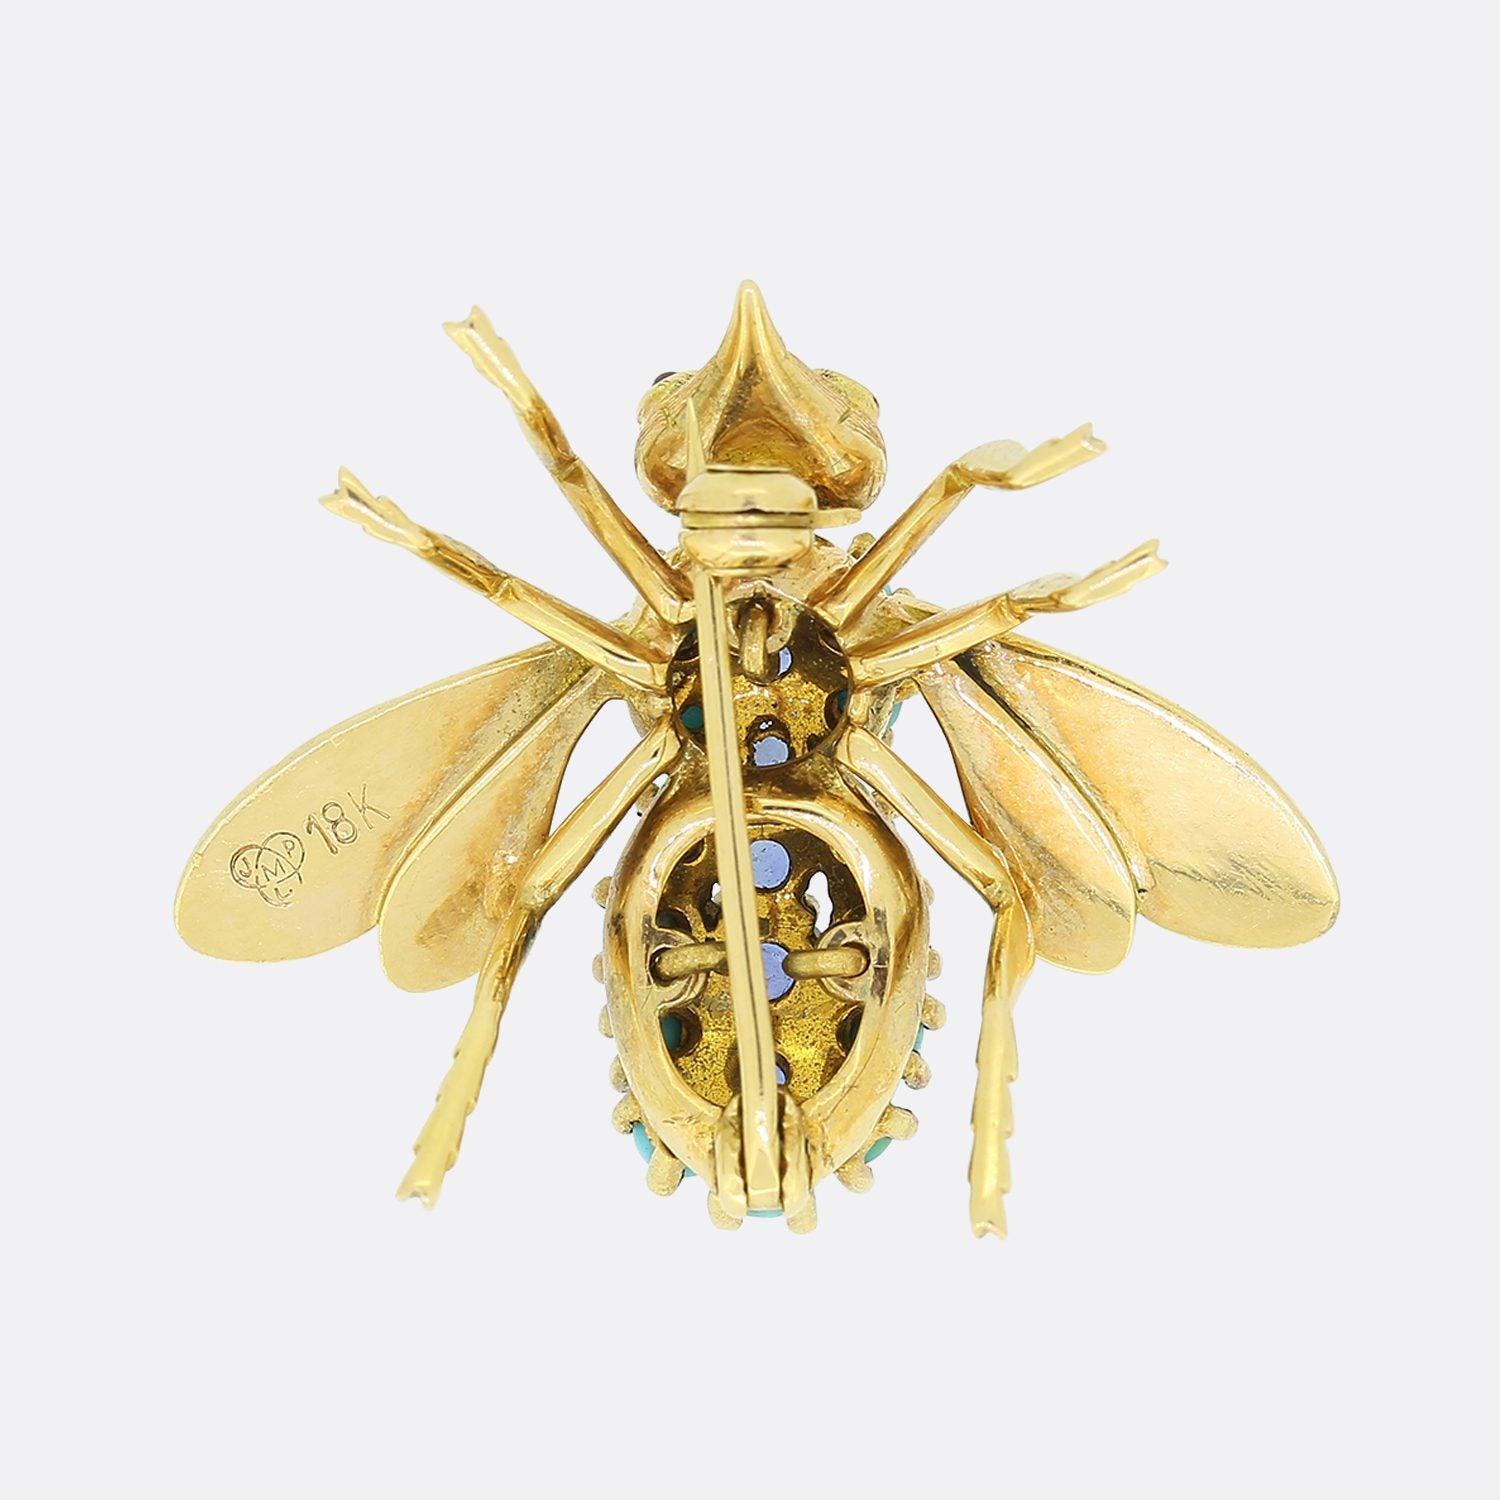 This is a vintage 18ct yellow gold brooch crafted into the shape of a fly. This ornate piece possesses expertly engraved features including wings, head and legs whilst the body is set with multiple round, claw set sapphires and turquoises. This